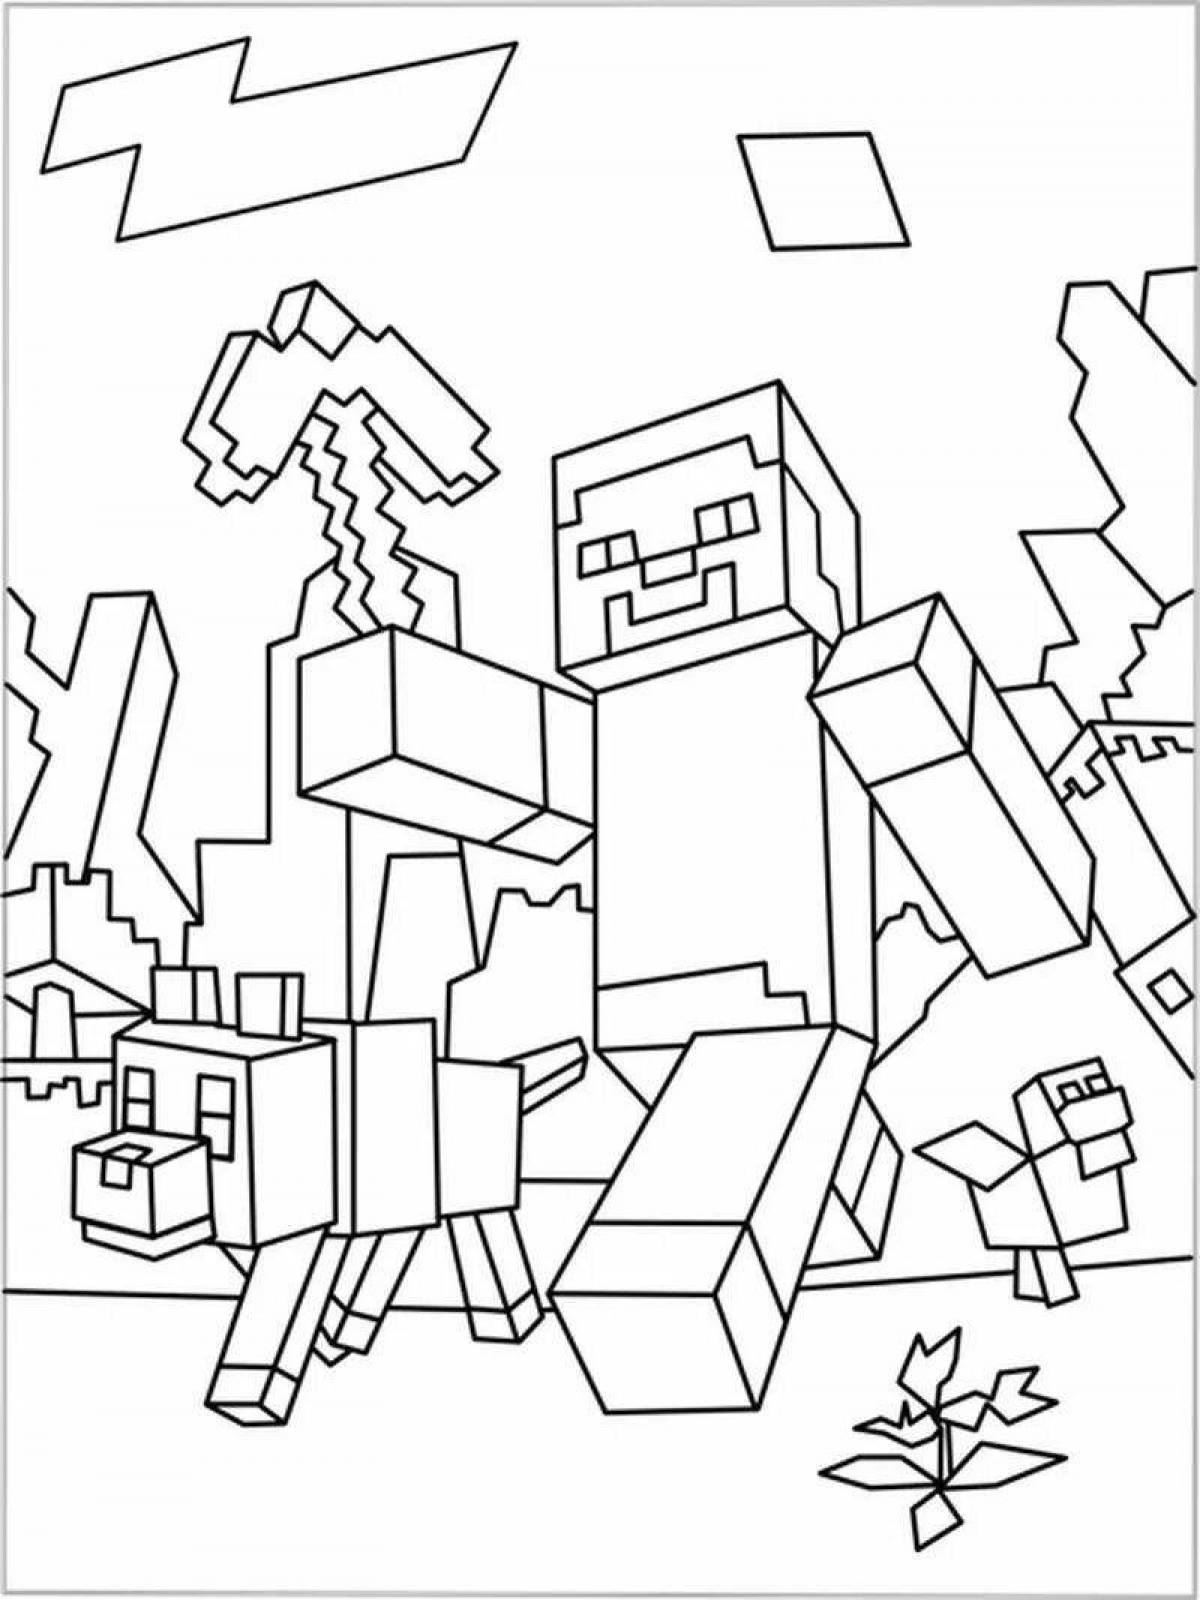 Colorful and fun minecraft coloring book for boys 6 years old